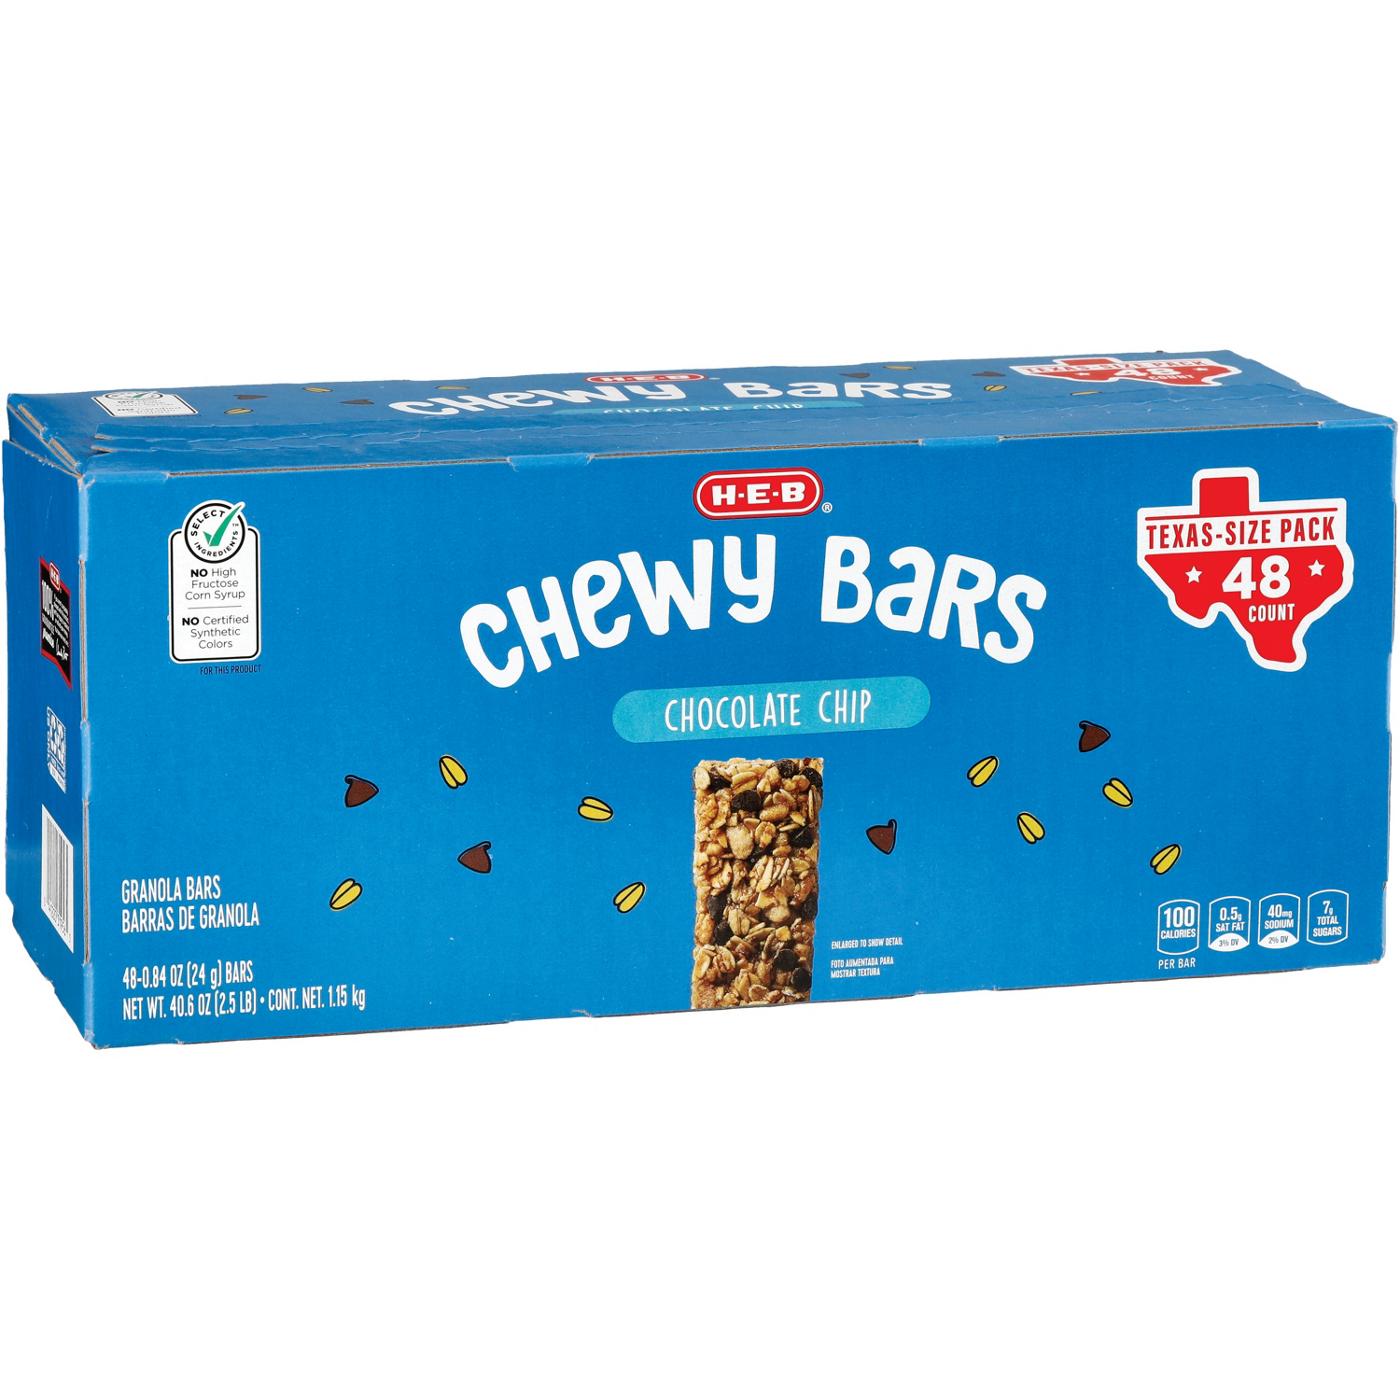 H-E-B Chocolate Chip Chewy Bars - Texas-Size Pack; image 2 of 2